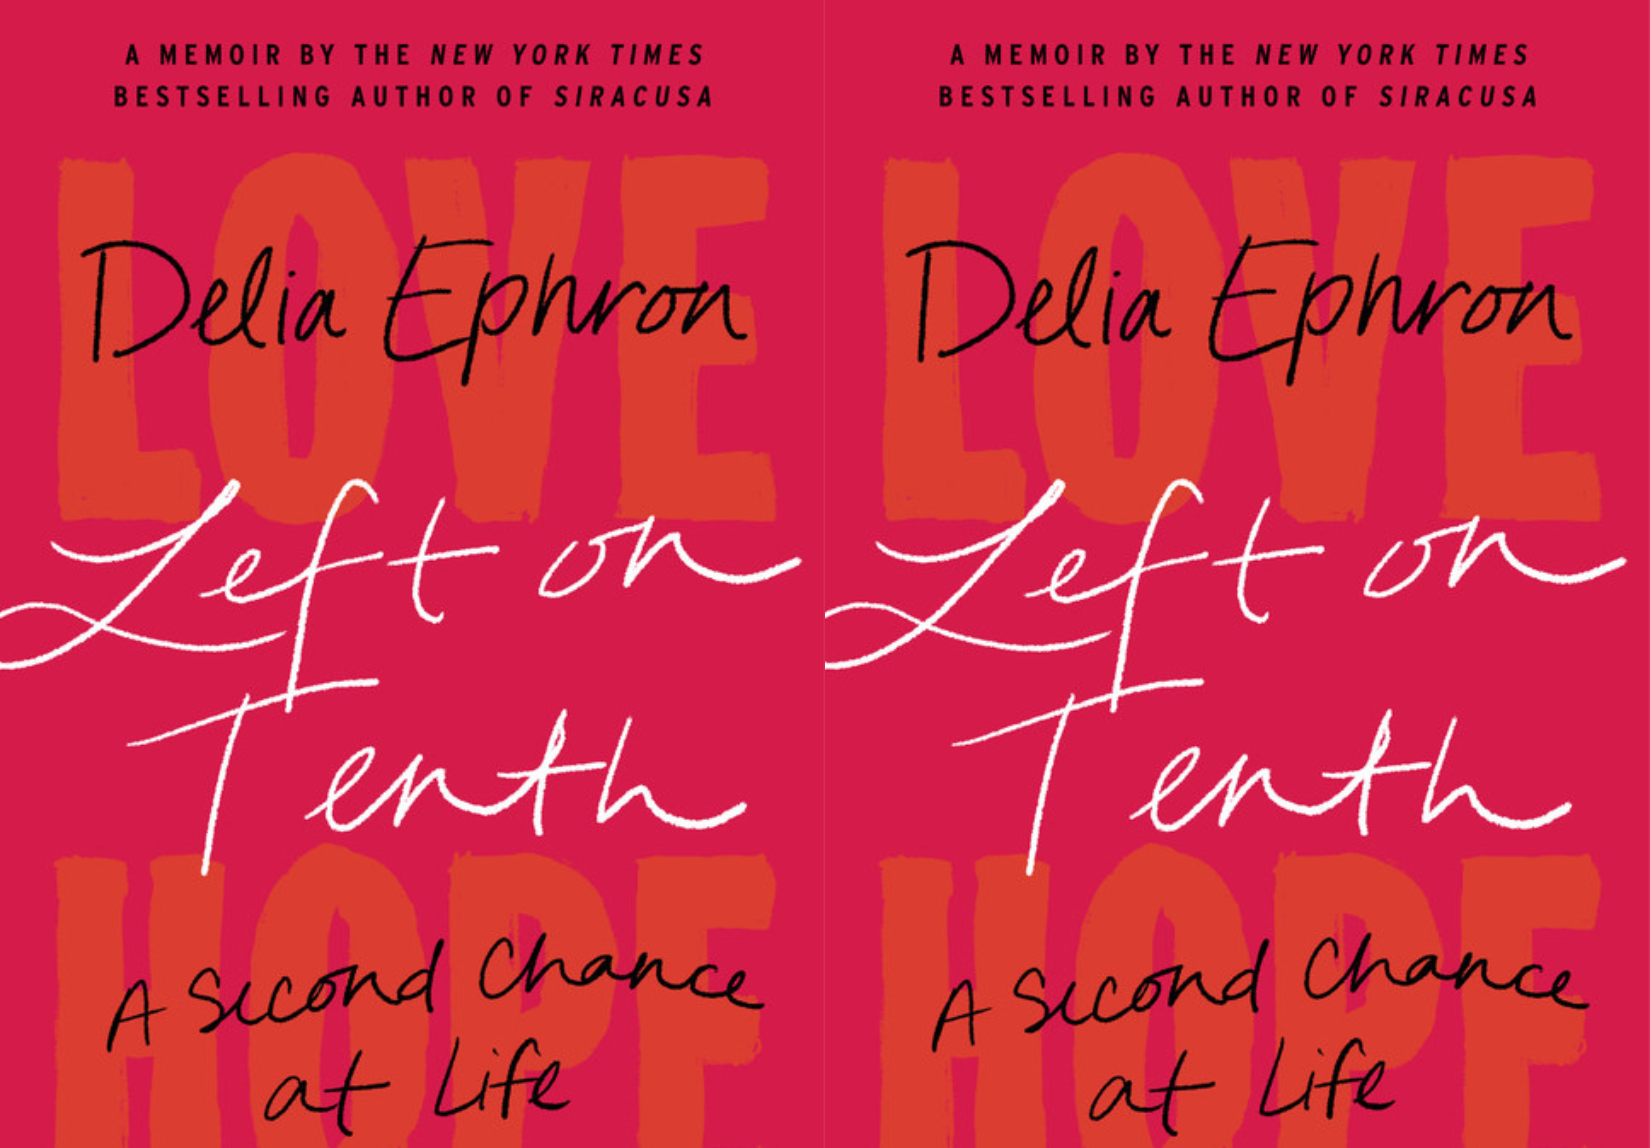 Cover of Delia Ephron's "Left on Tenth" book